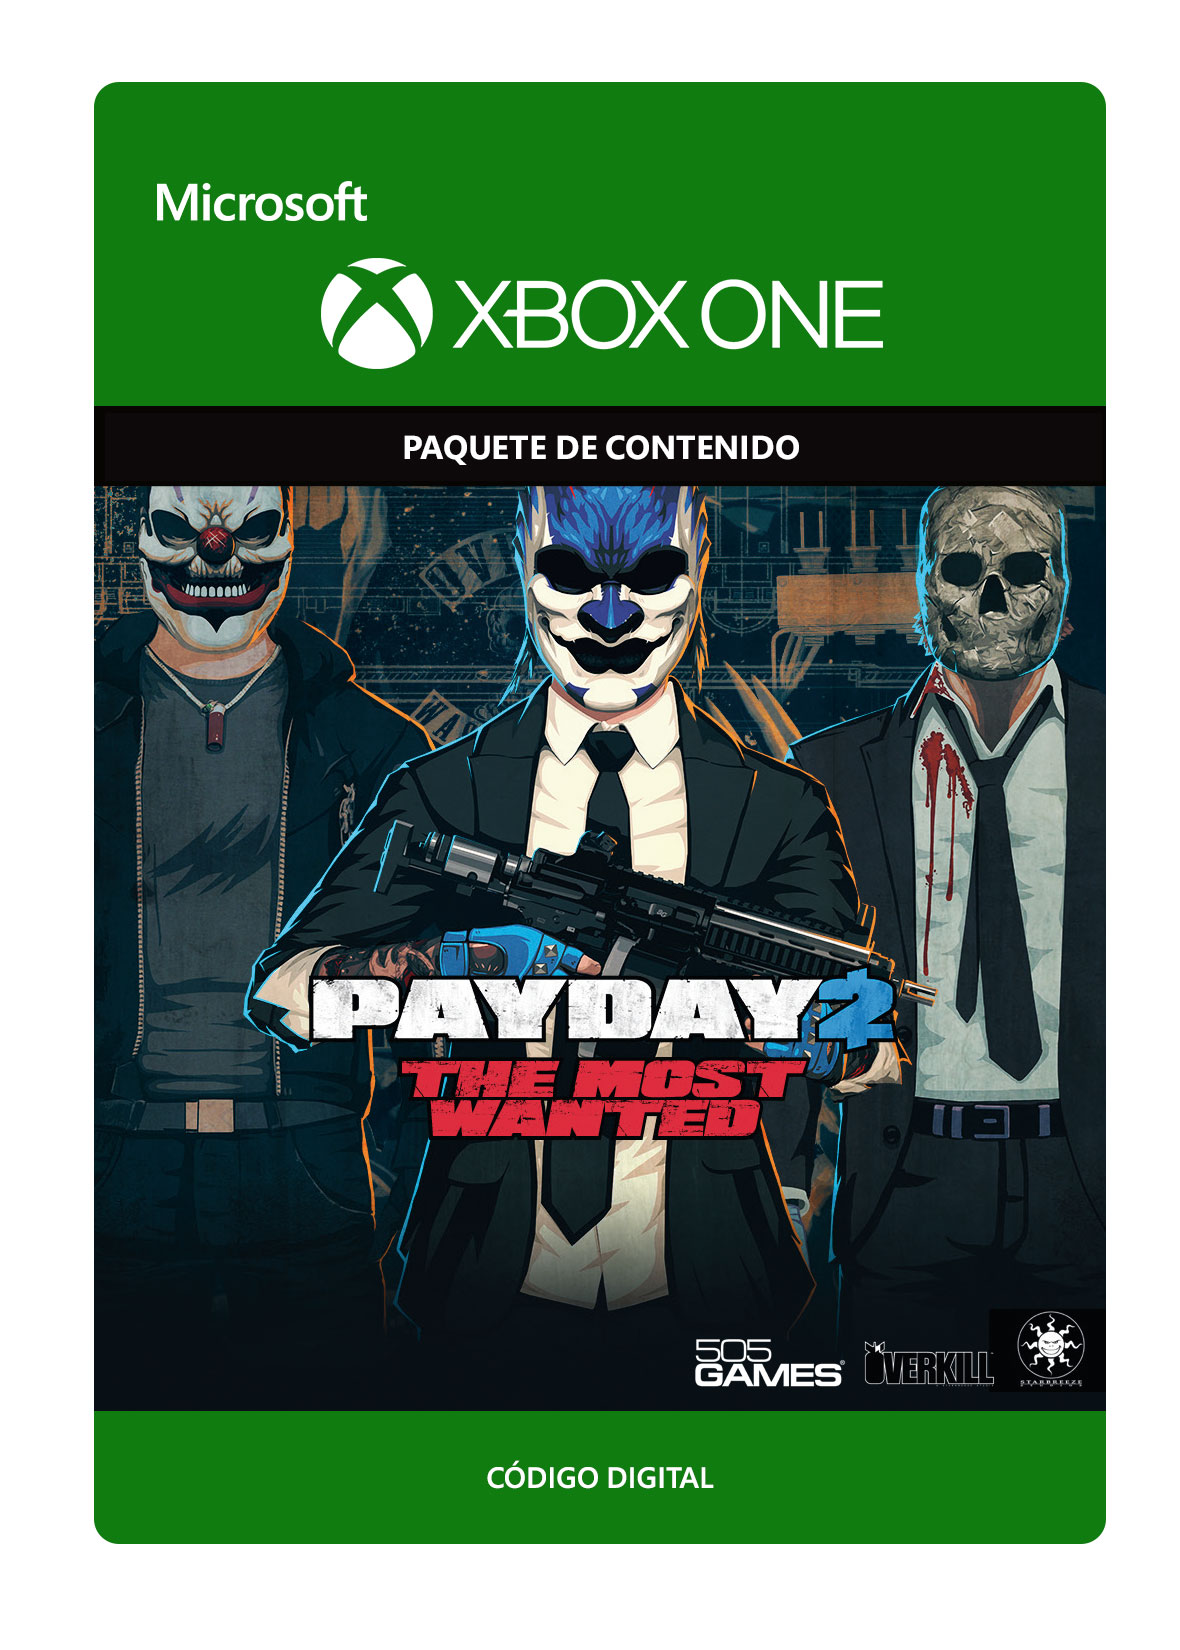 Xbox One - Payday 2: The Most Wanted Bundle - Juego Completo Descargable